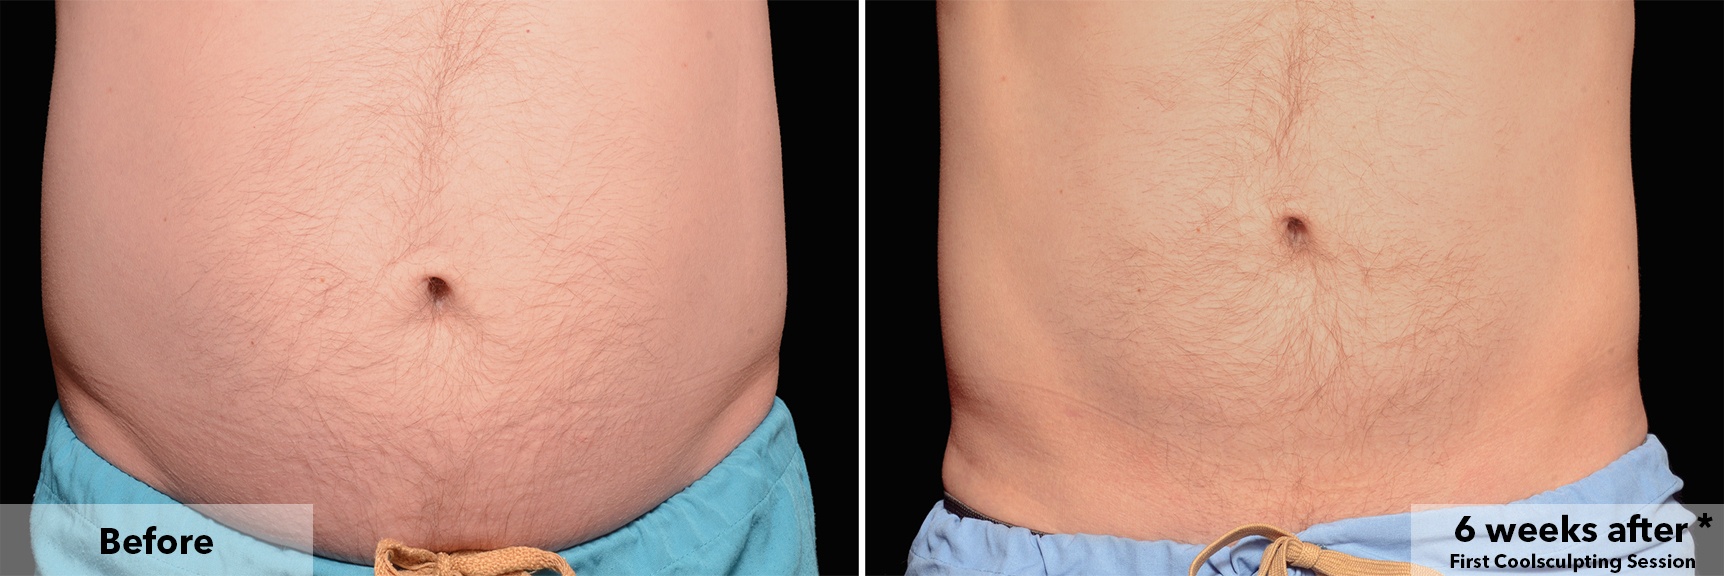 Before and After - Coolsculpting London, Cool Clinic® on Harley Street